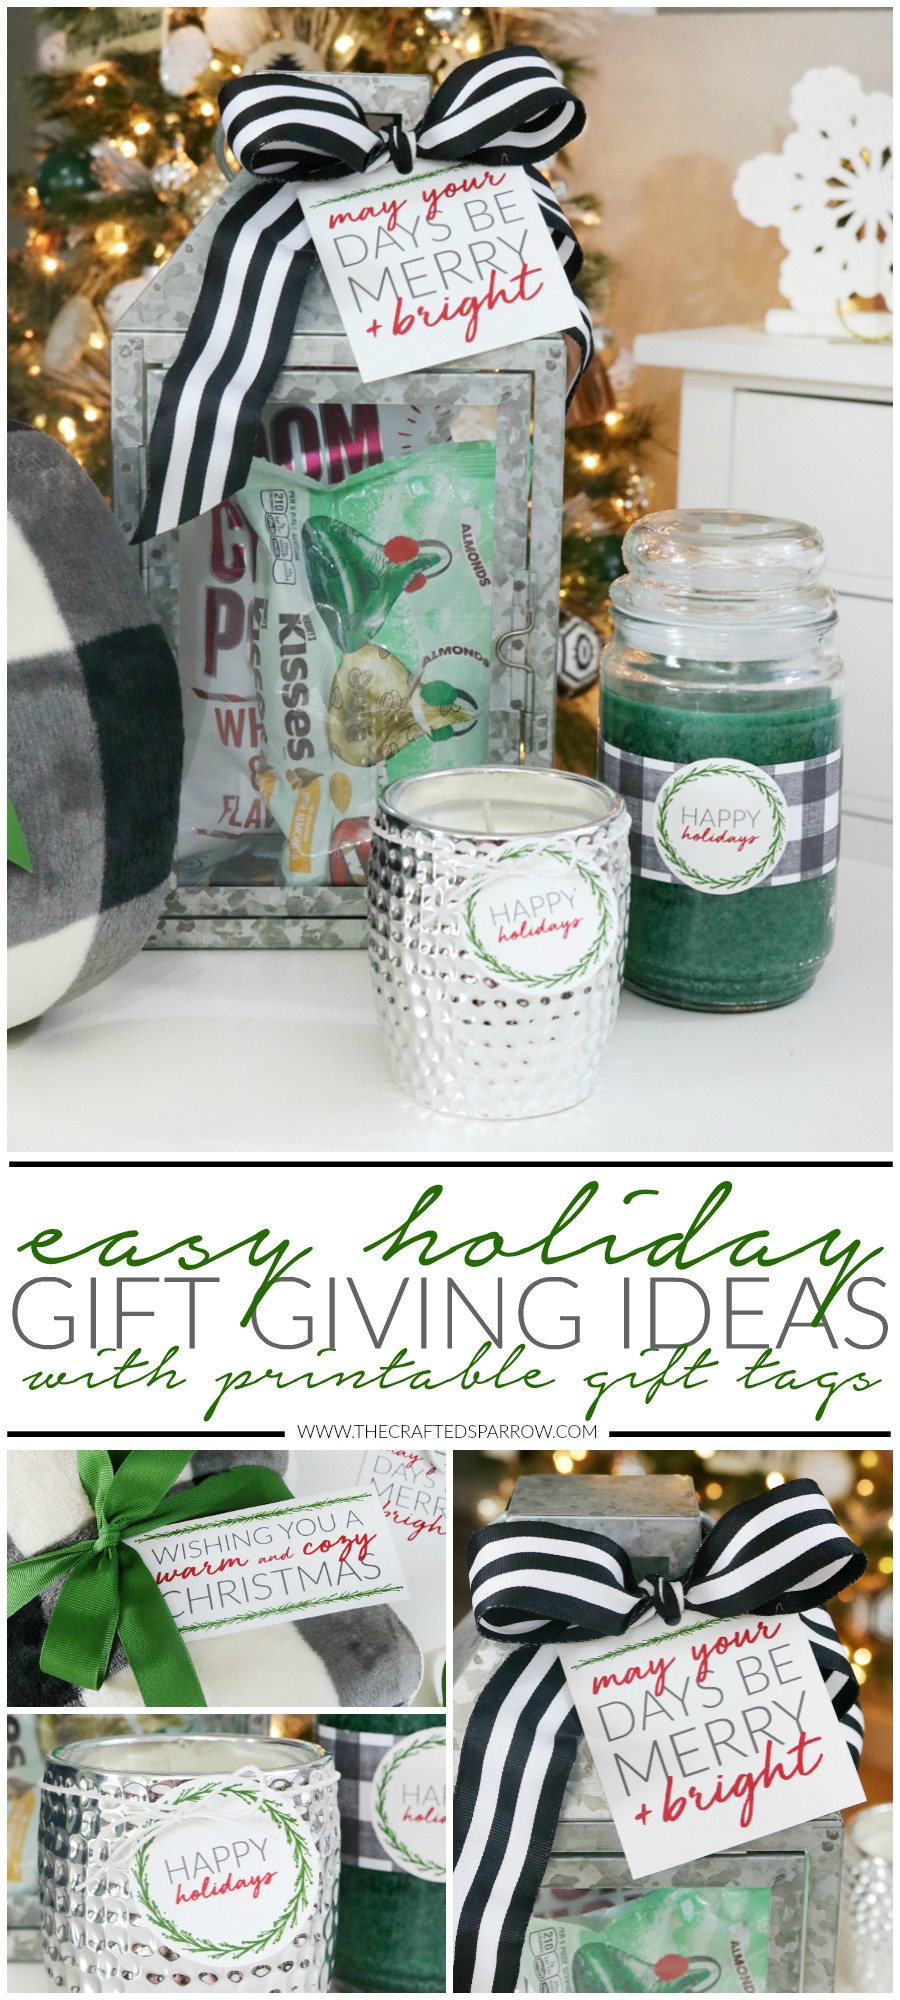 Neighbor Gift Ideas with Printable Tags - Organize and Decorate